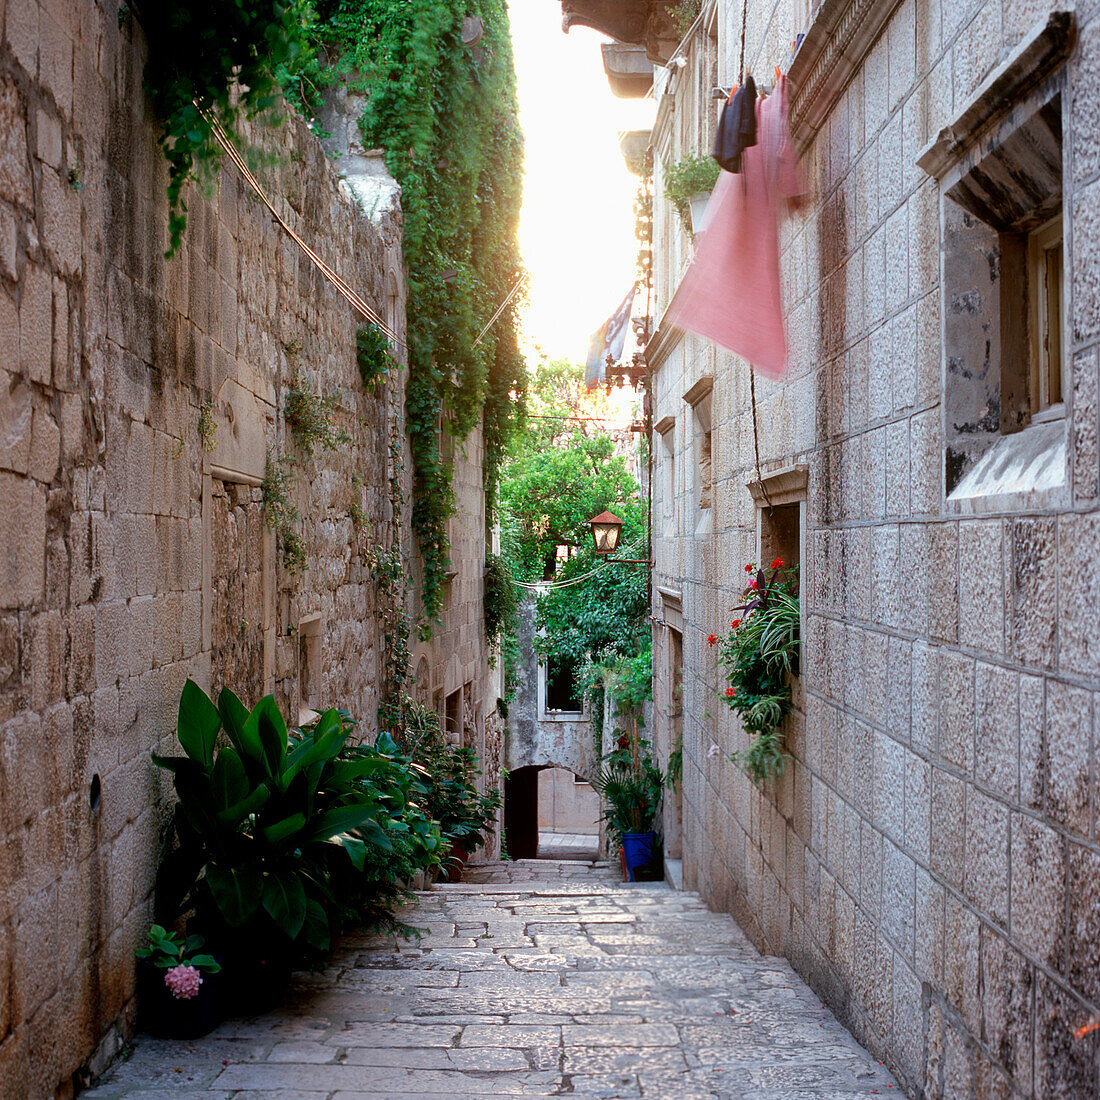 View inside an alley wiht old stone houses and clotheslines at facade, Korcula, Dalmatia, Croatia